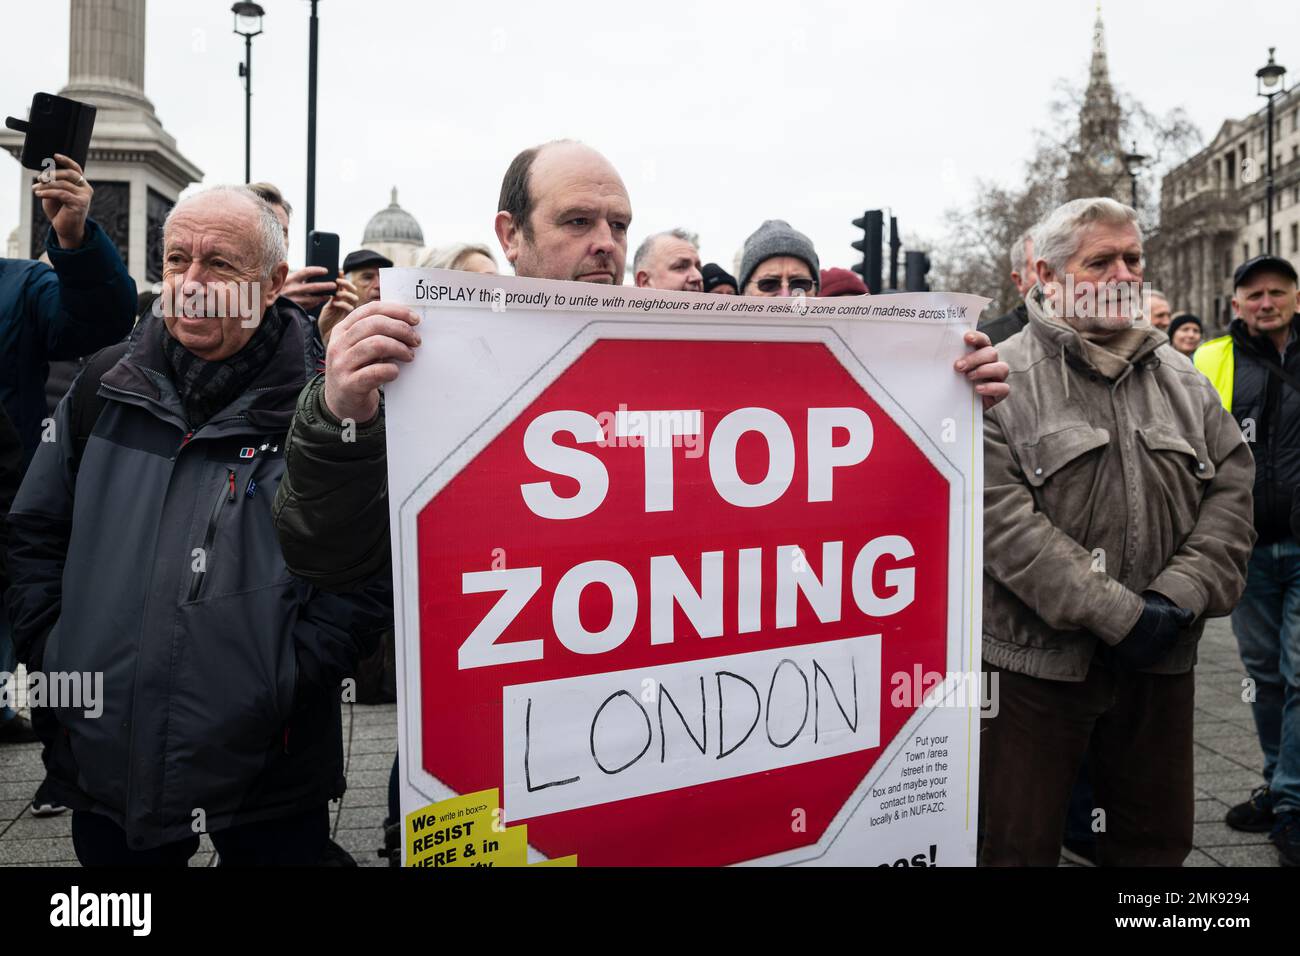 London, UK, January 28th 2023. A Protest 'No to ULEZ' against the Ultra Low Emission Zone (ULEZ) in London is led by Piers Corbyn, brother of former Labour Leader Jeremy Corbyn. (Tennessee Jones - Alamy Live News) Stock Photo